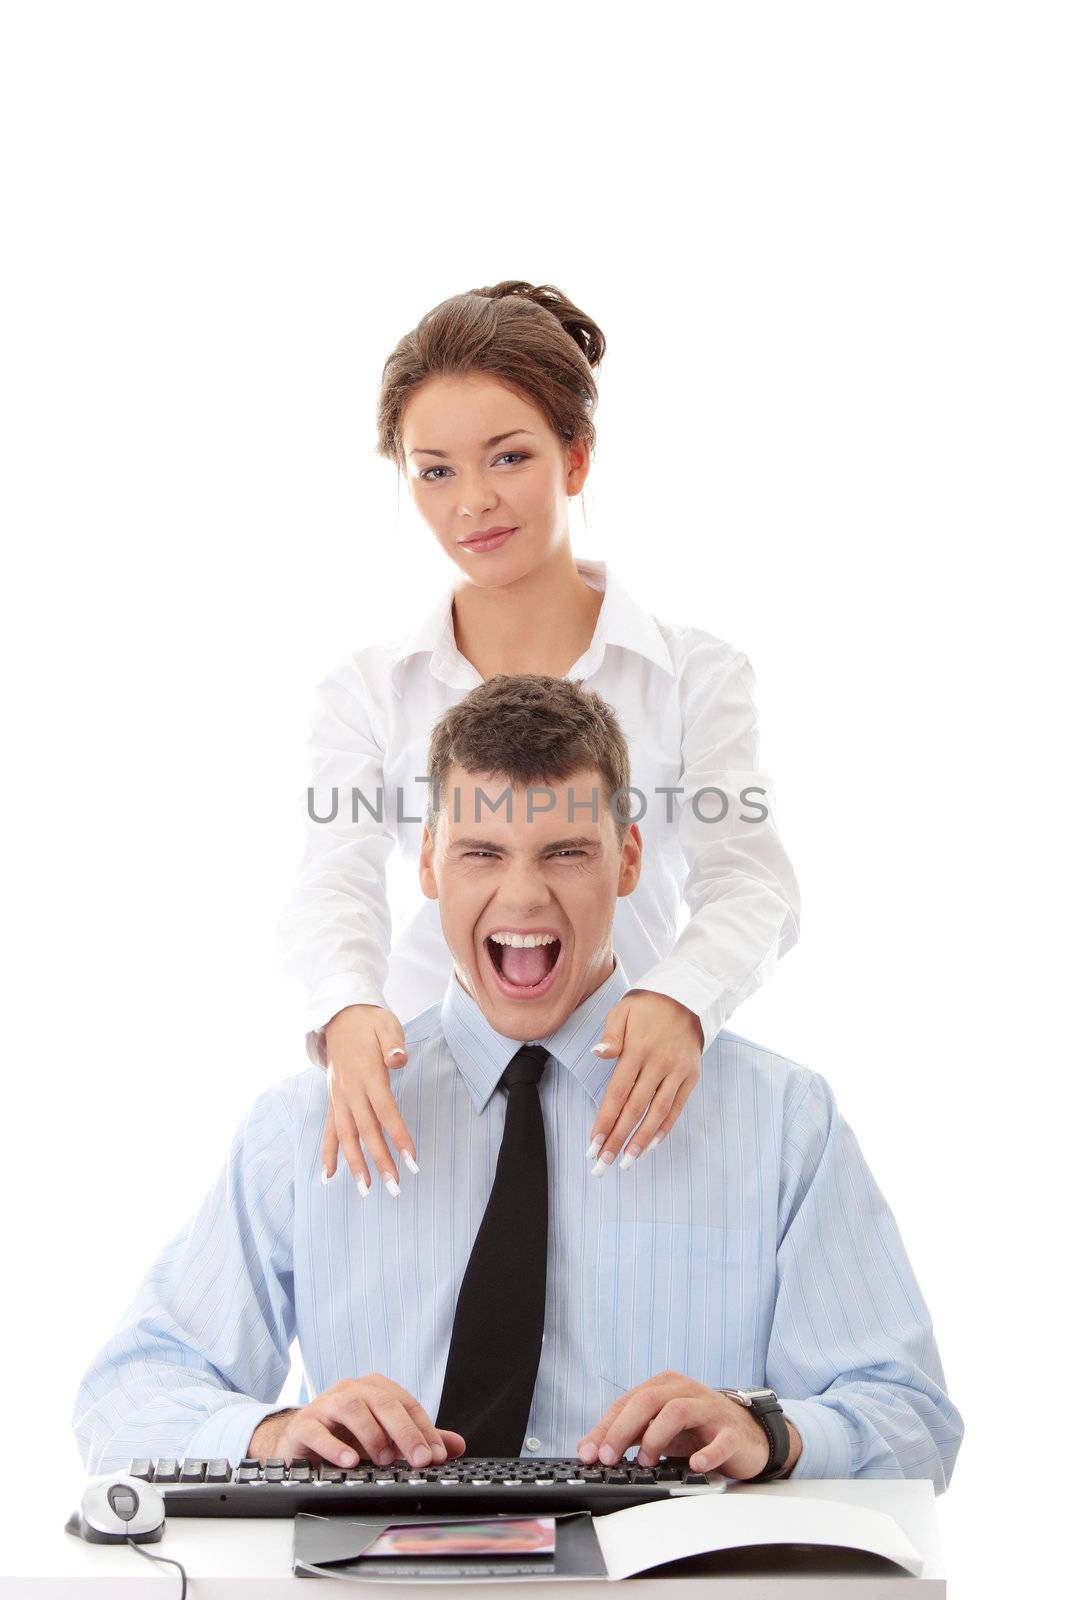 Young businessman shouting, while businesswoman stending behind him. Isolated on white